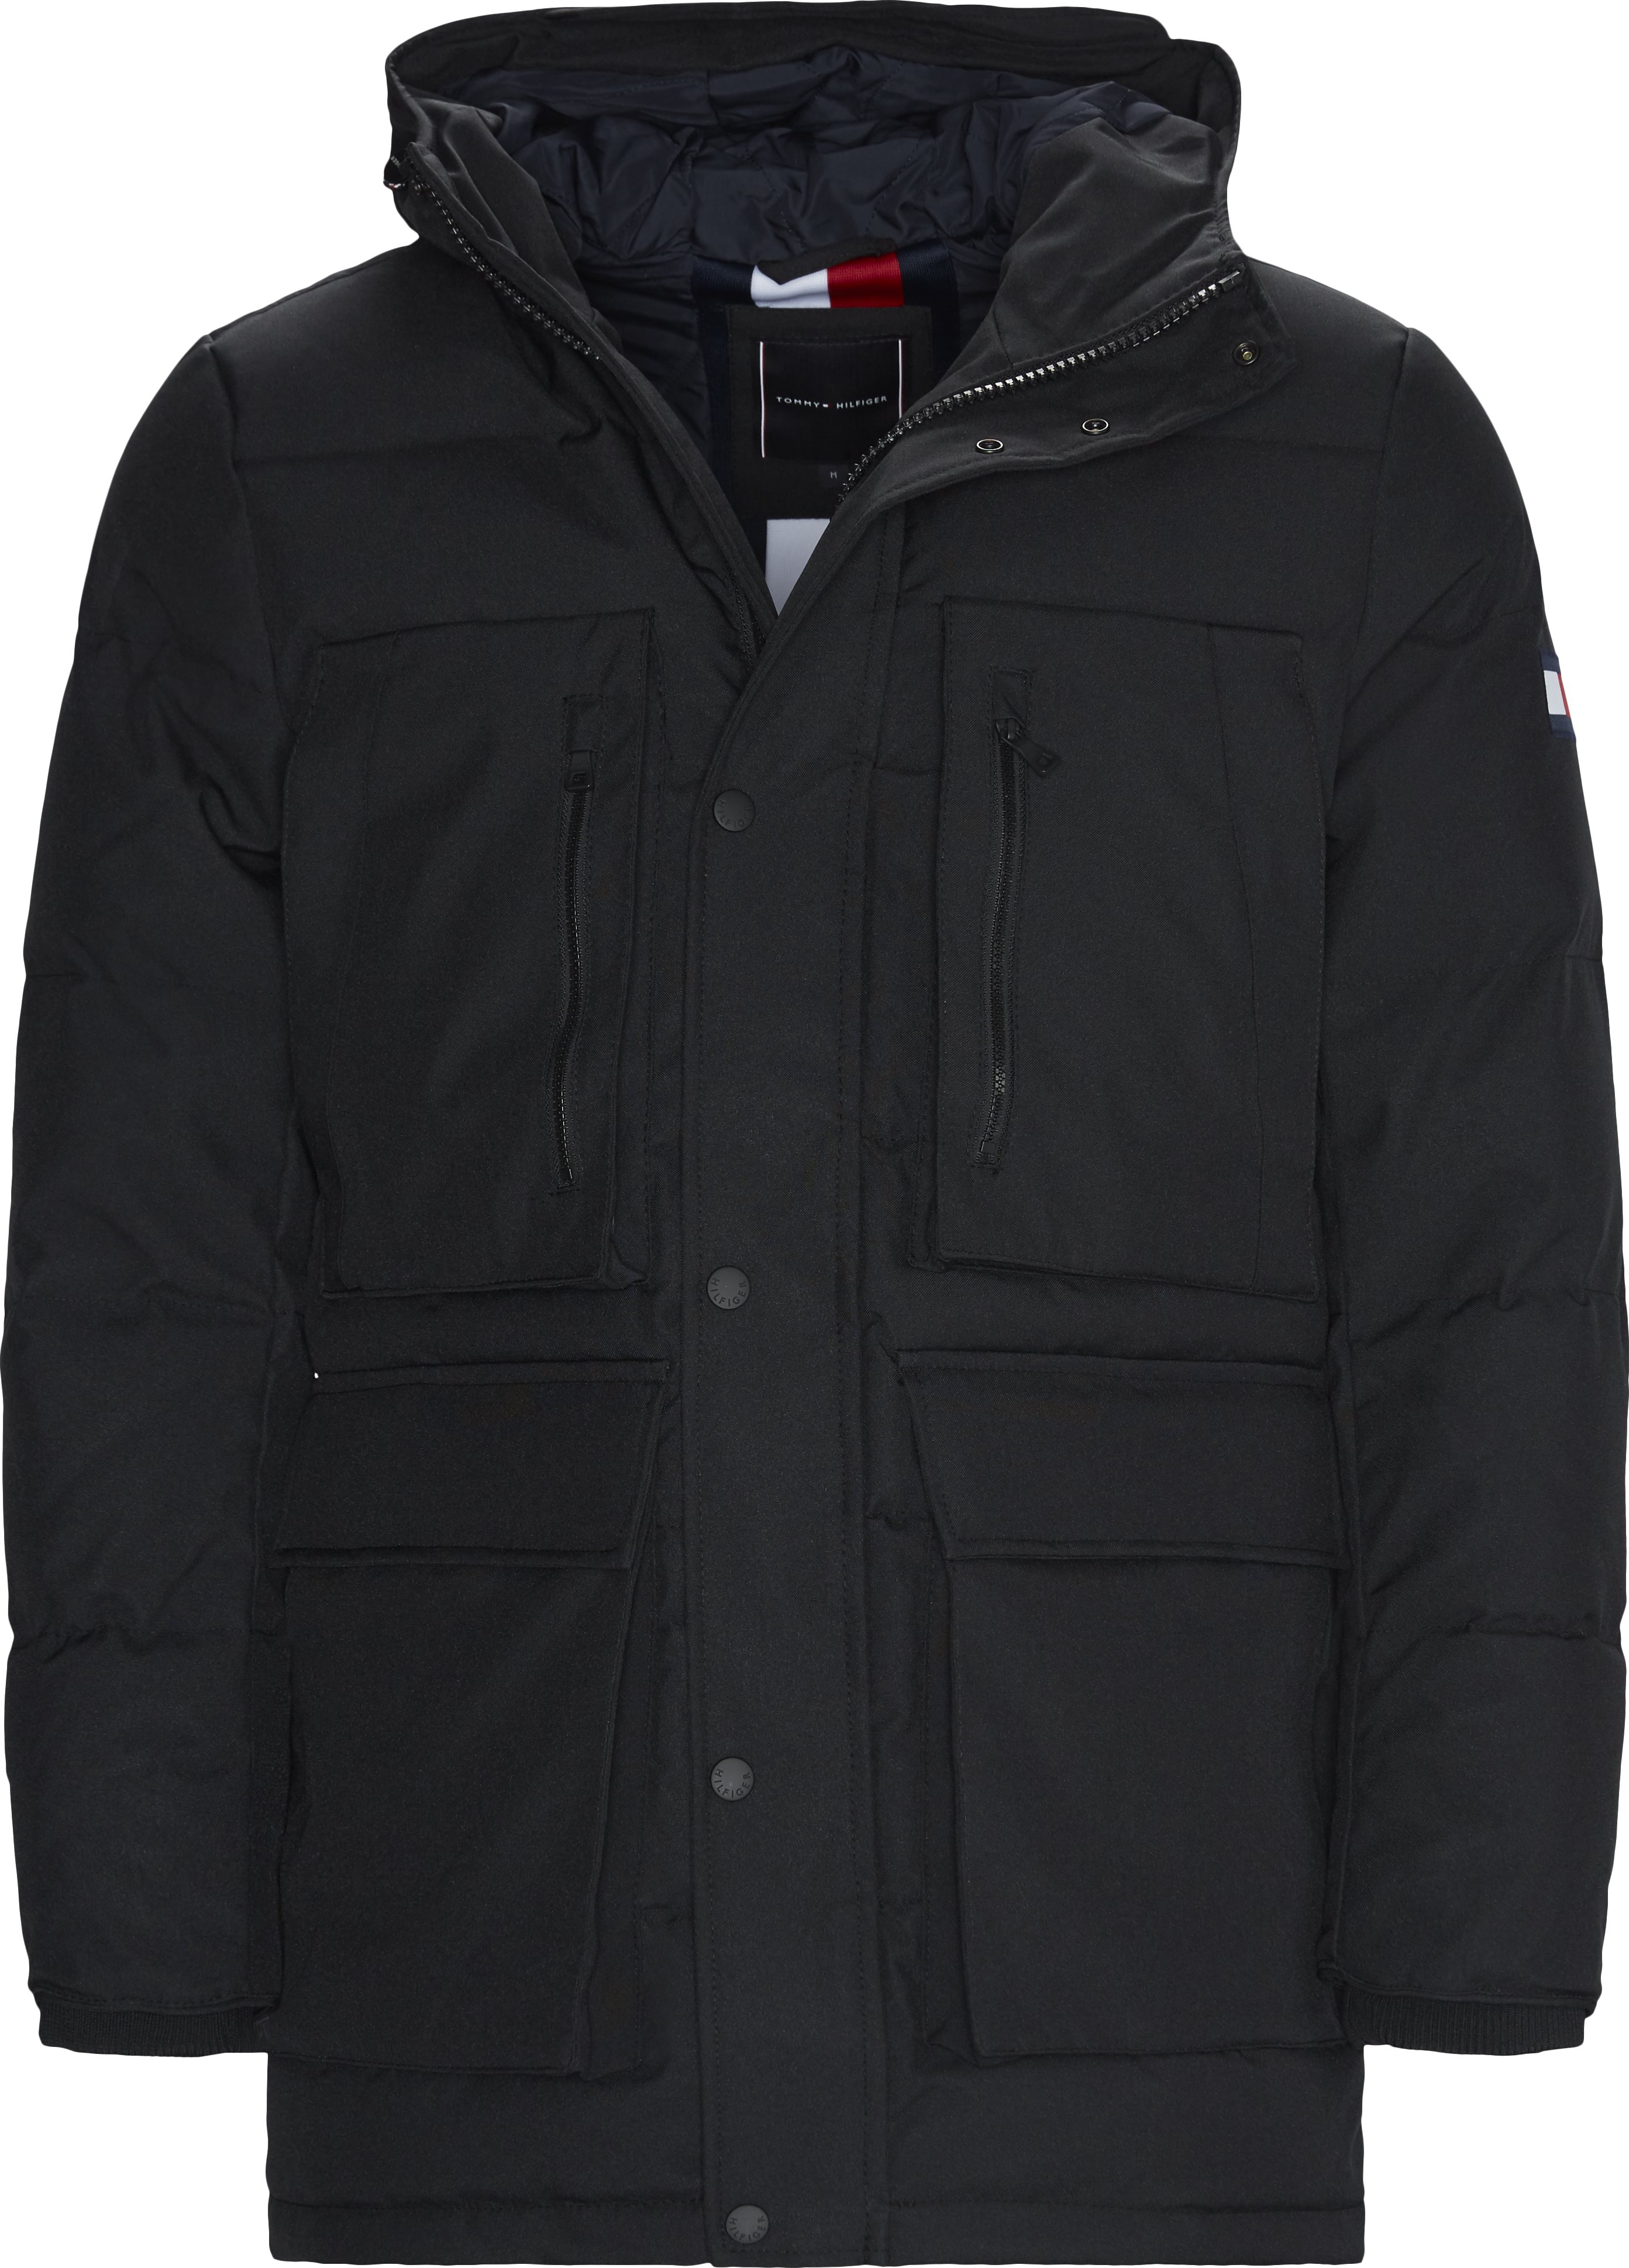 HEAVY CANVAS DOWN PARKA Jackets SORT from Tommy Hilfiger 430 EUR